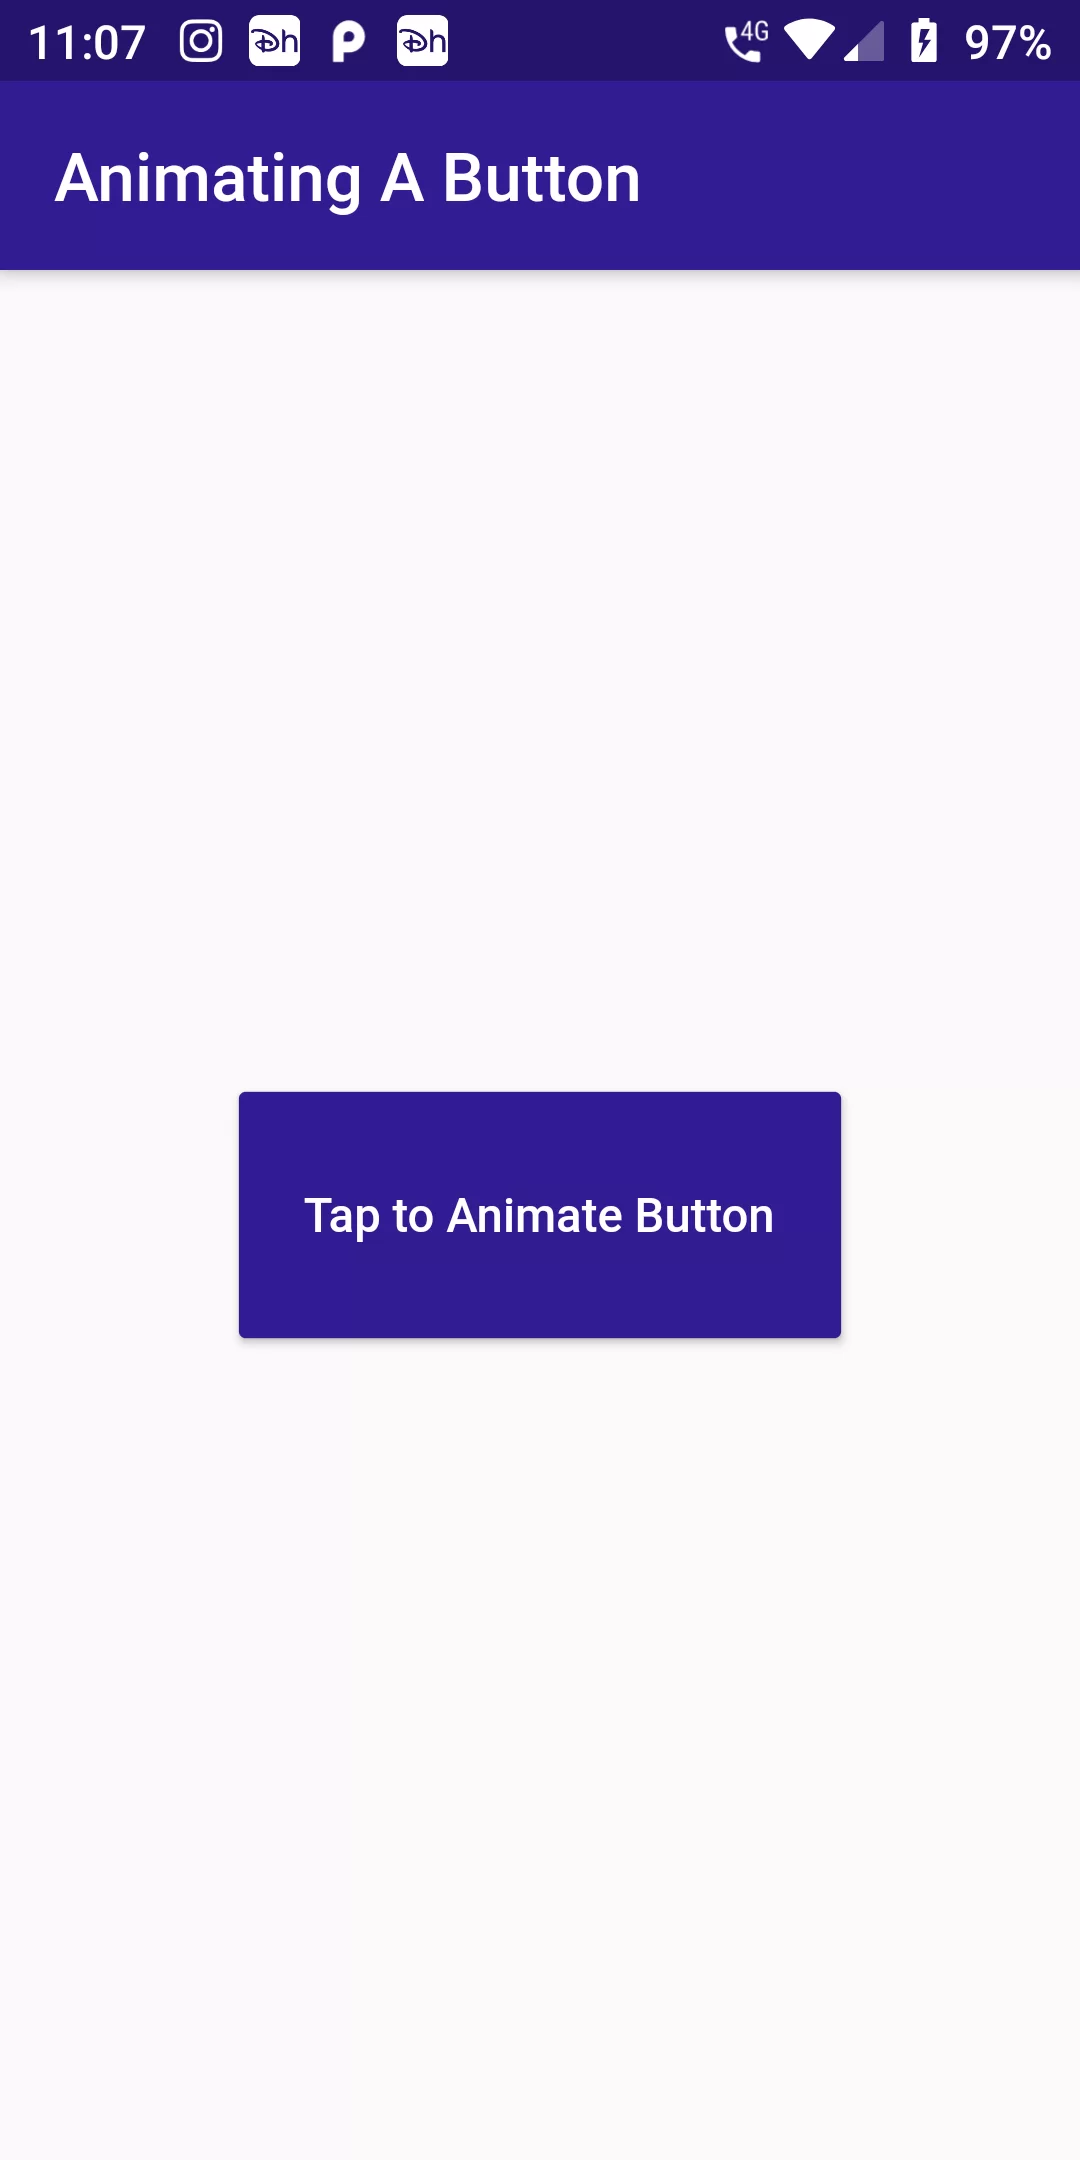 How To Aniamation A Button Using Flutter Android App